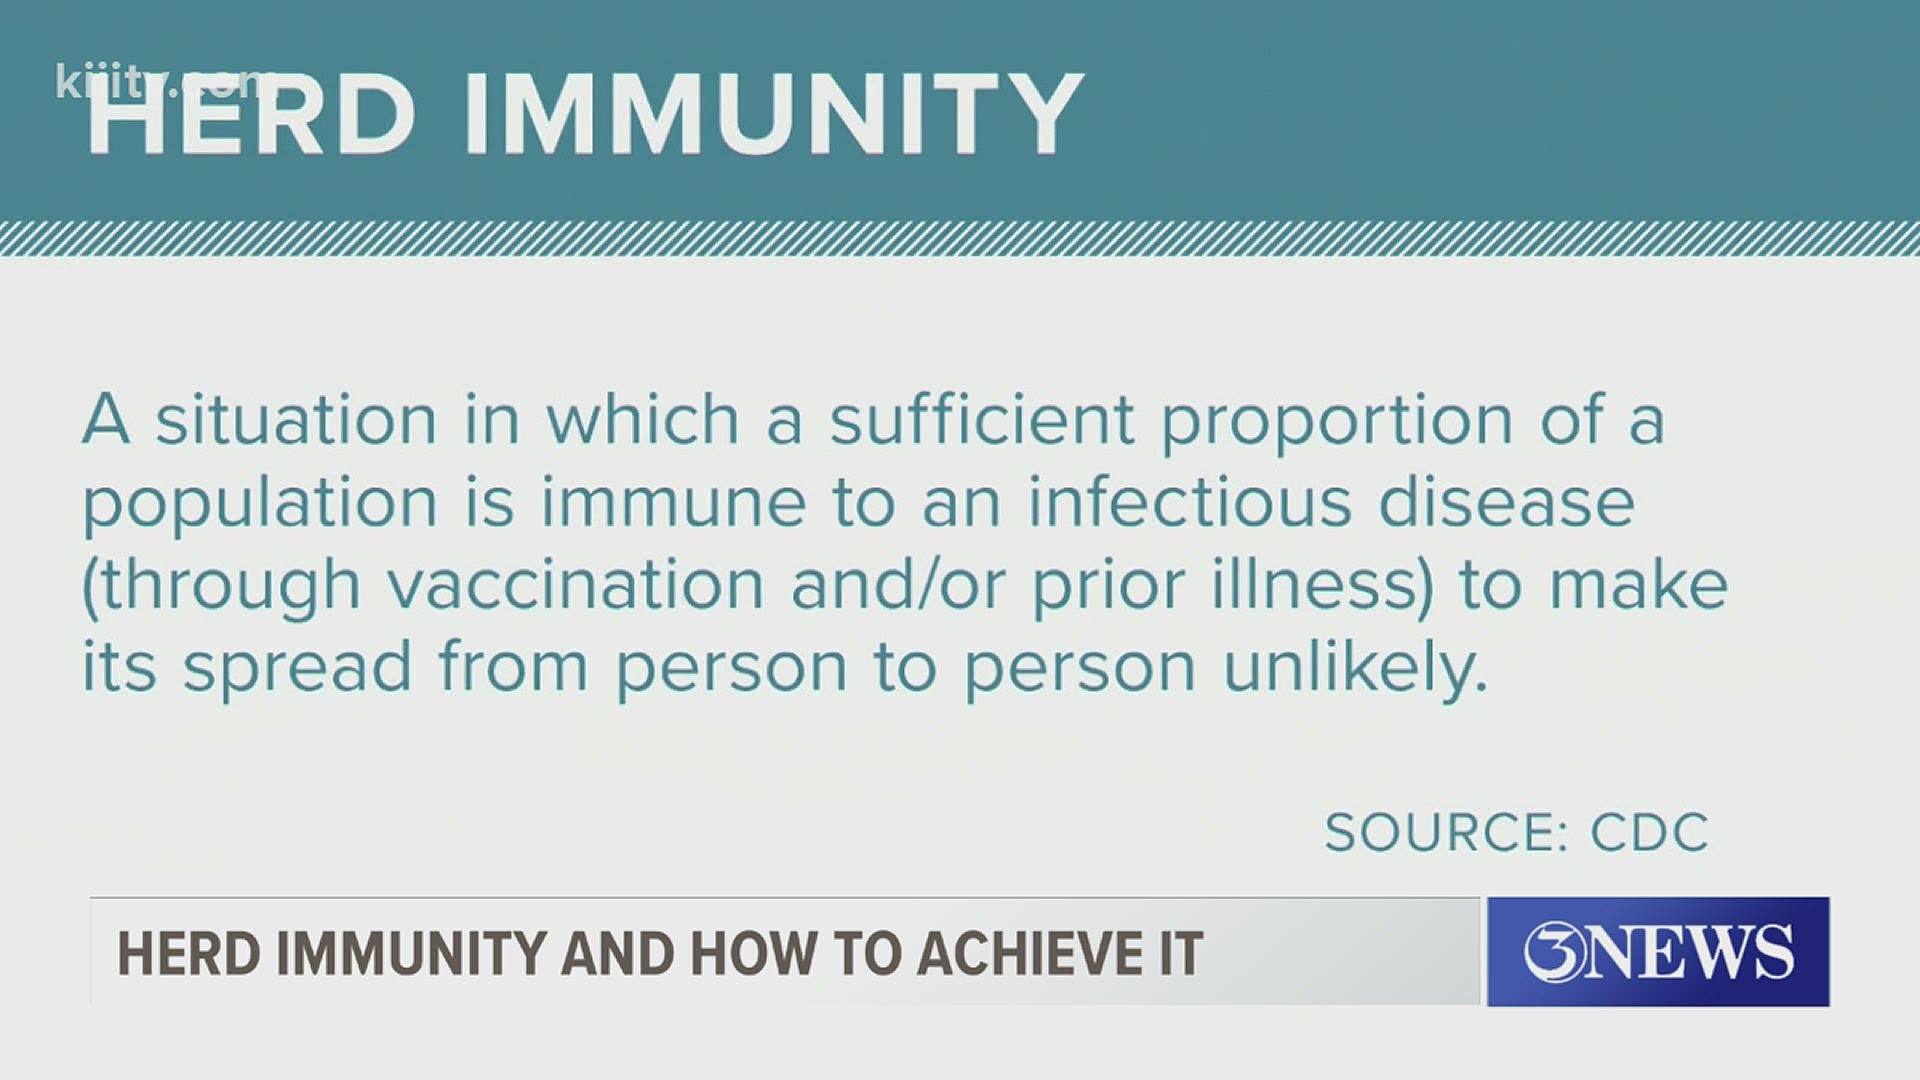 Medical expert, Dr. Salim Surani says there are two ways a community can achieve 'herd immunity.'